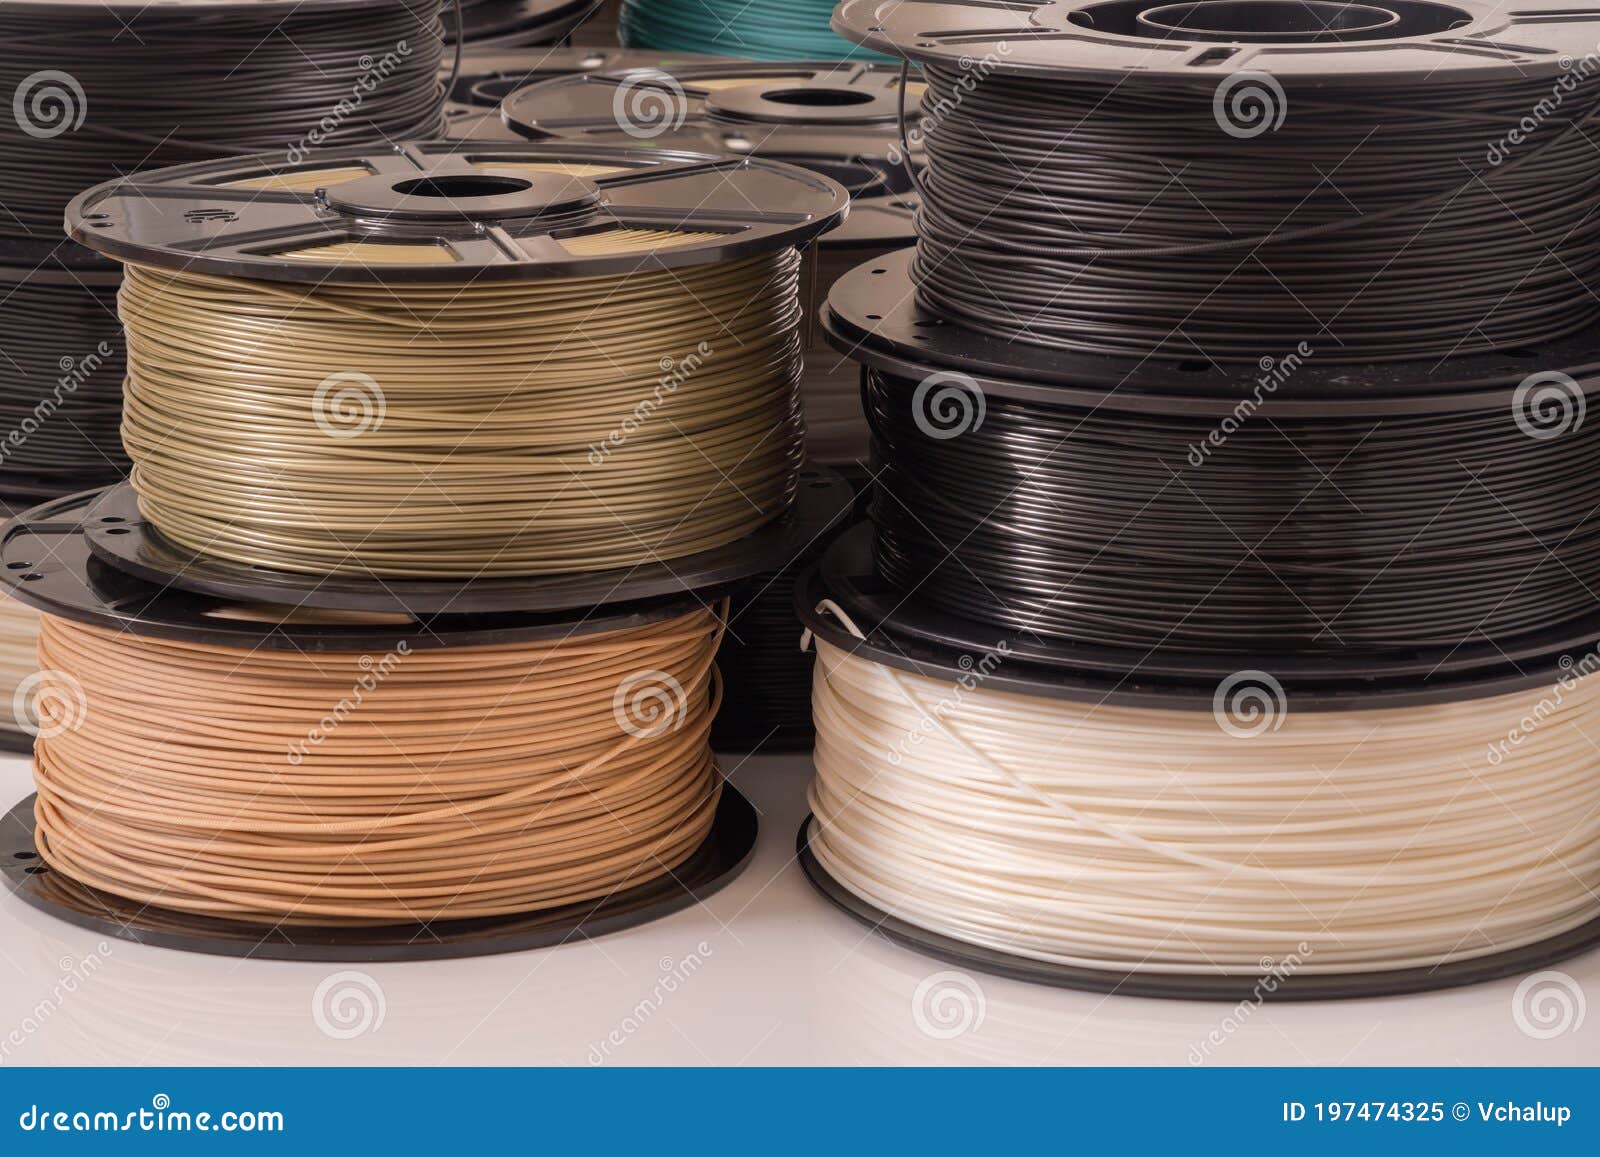 many pla and abs filament spools for 3d printer.